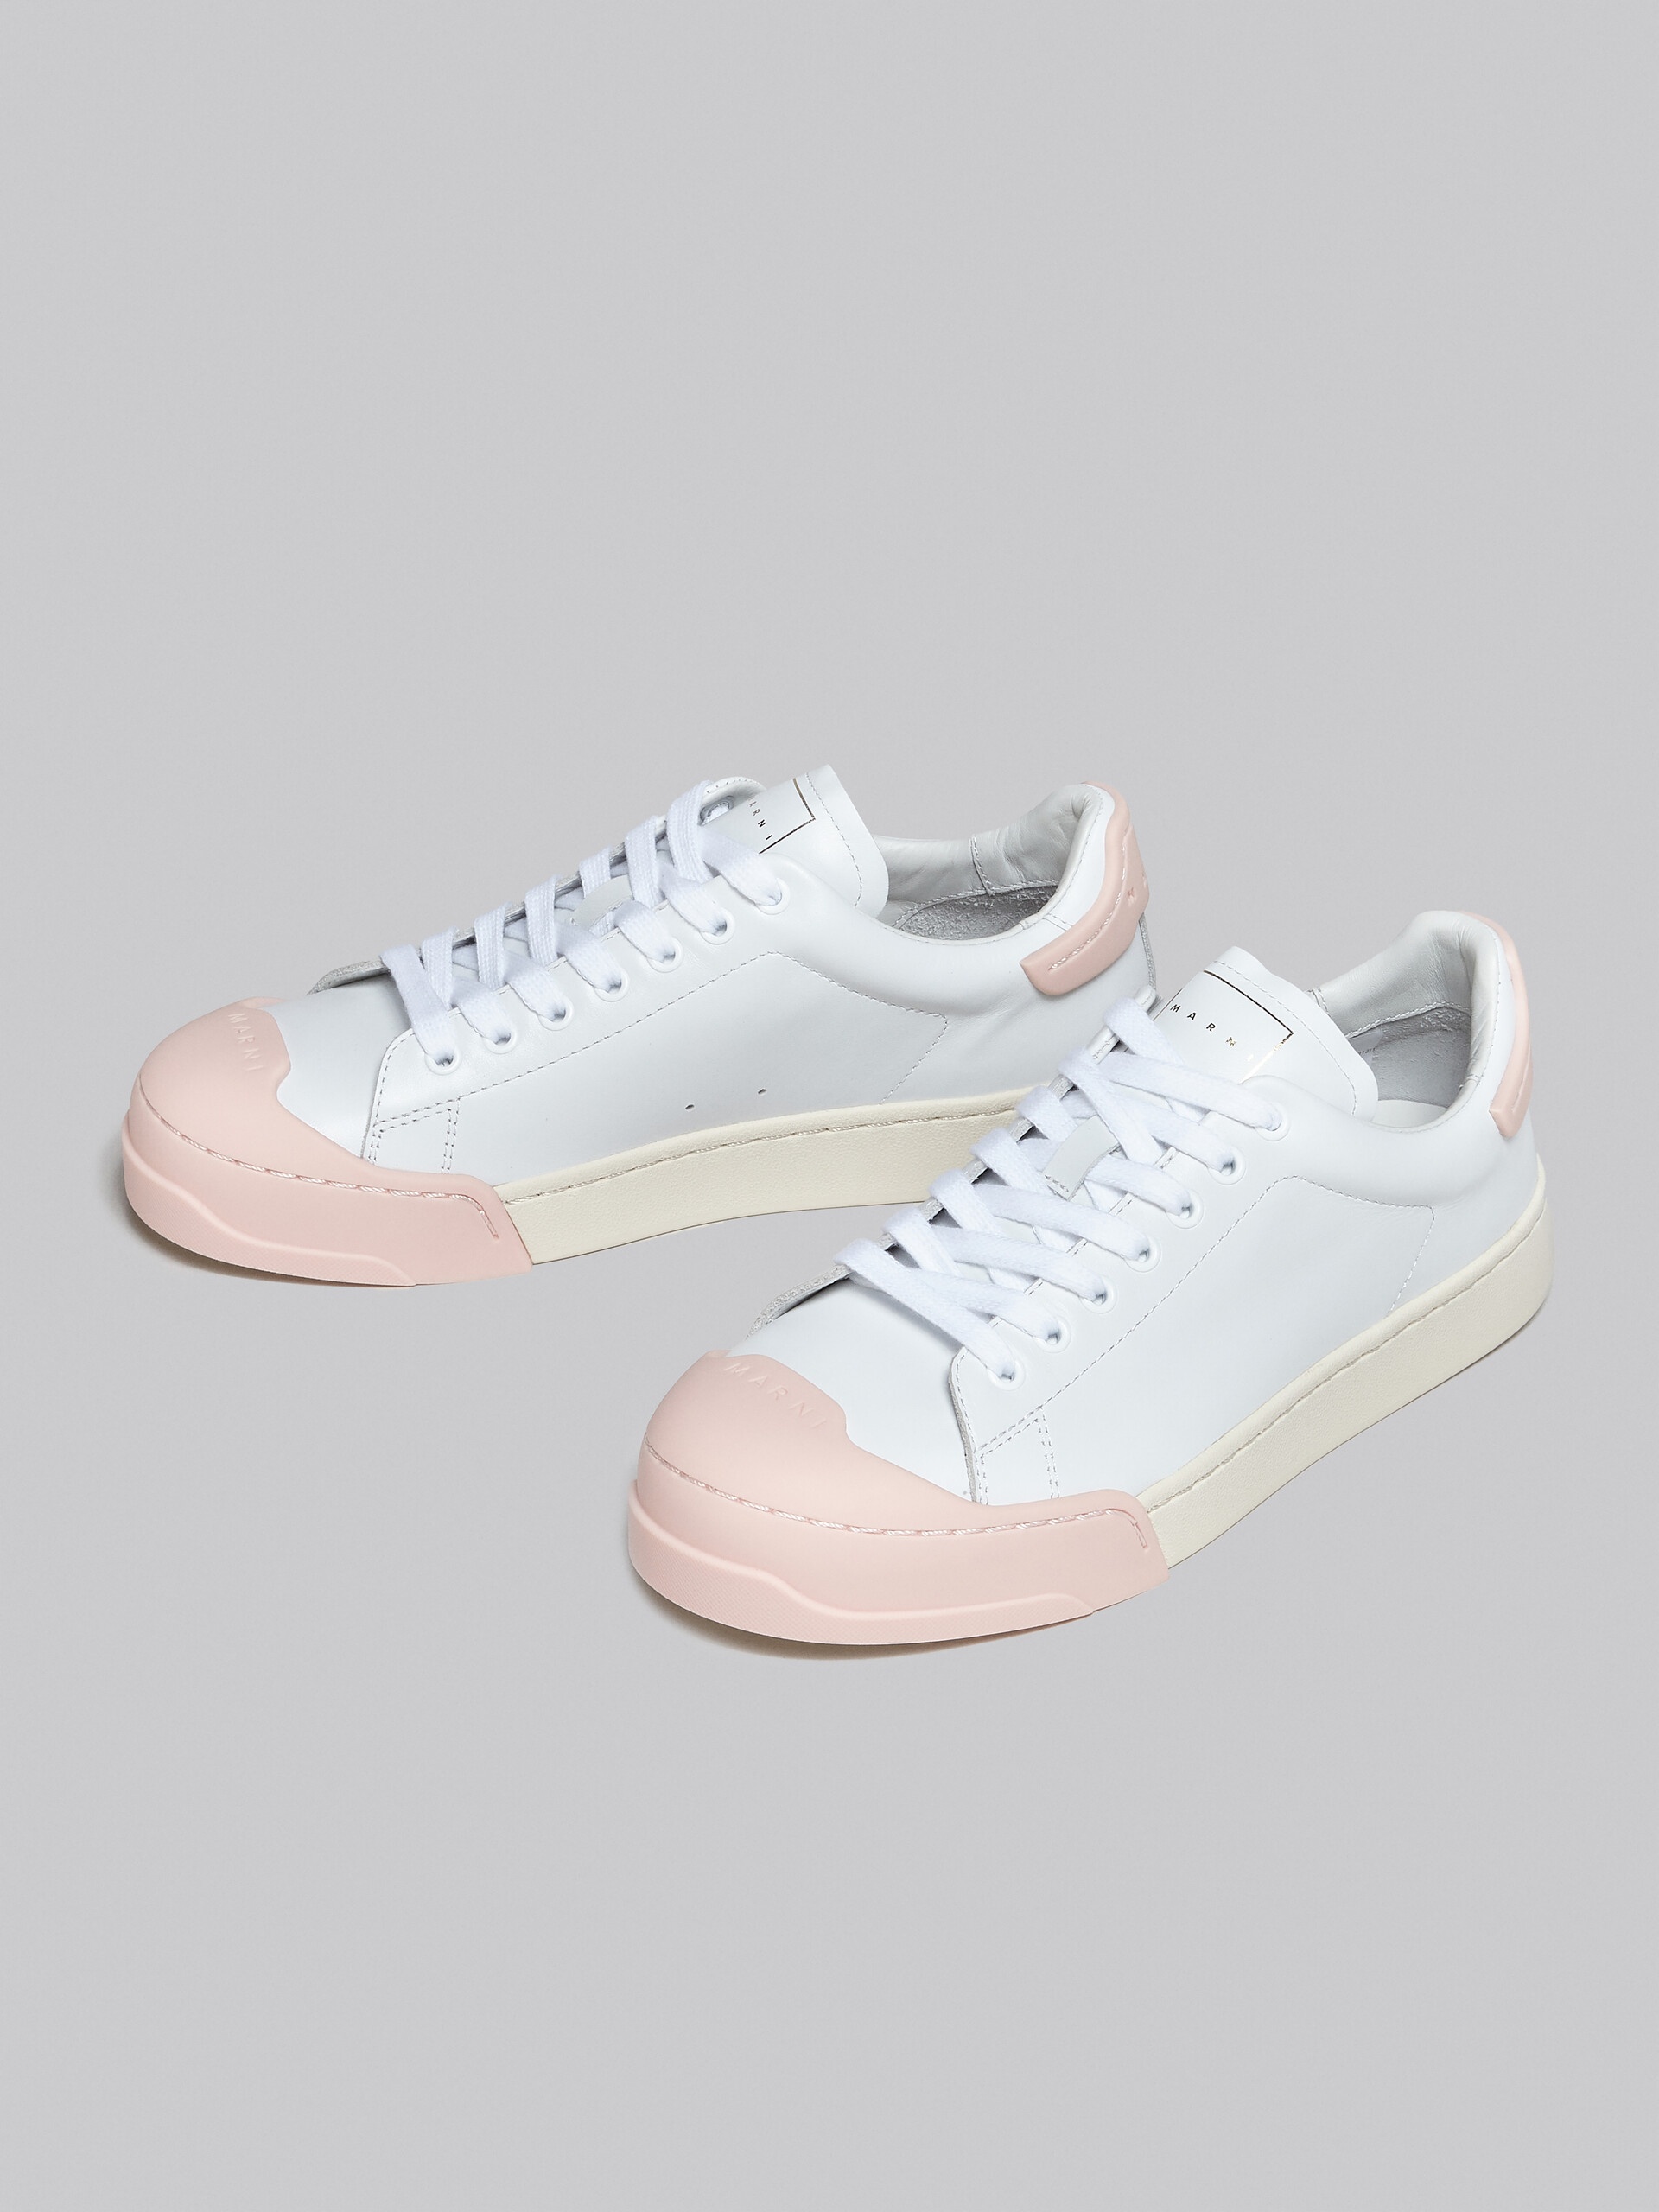 DADA BUMPER SNEAKER IN WHITE AND PINK LEATHER - 5